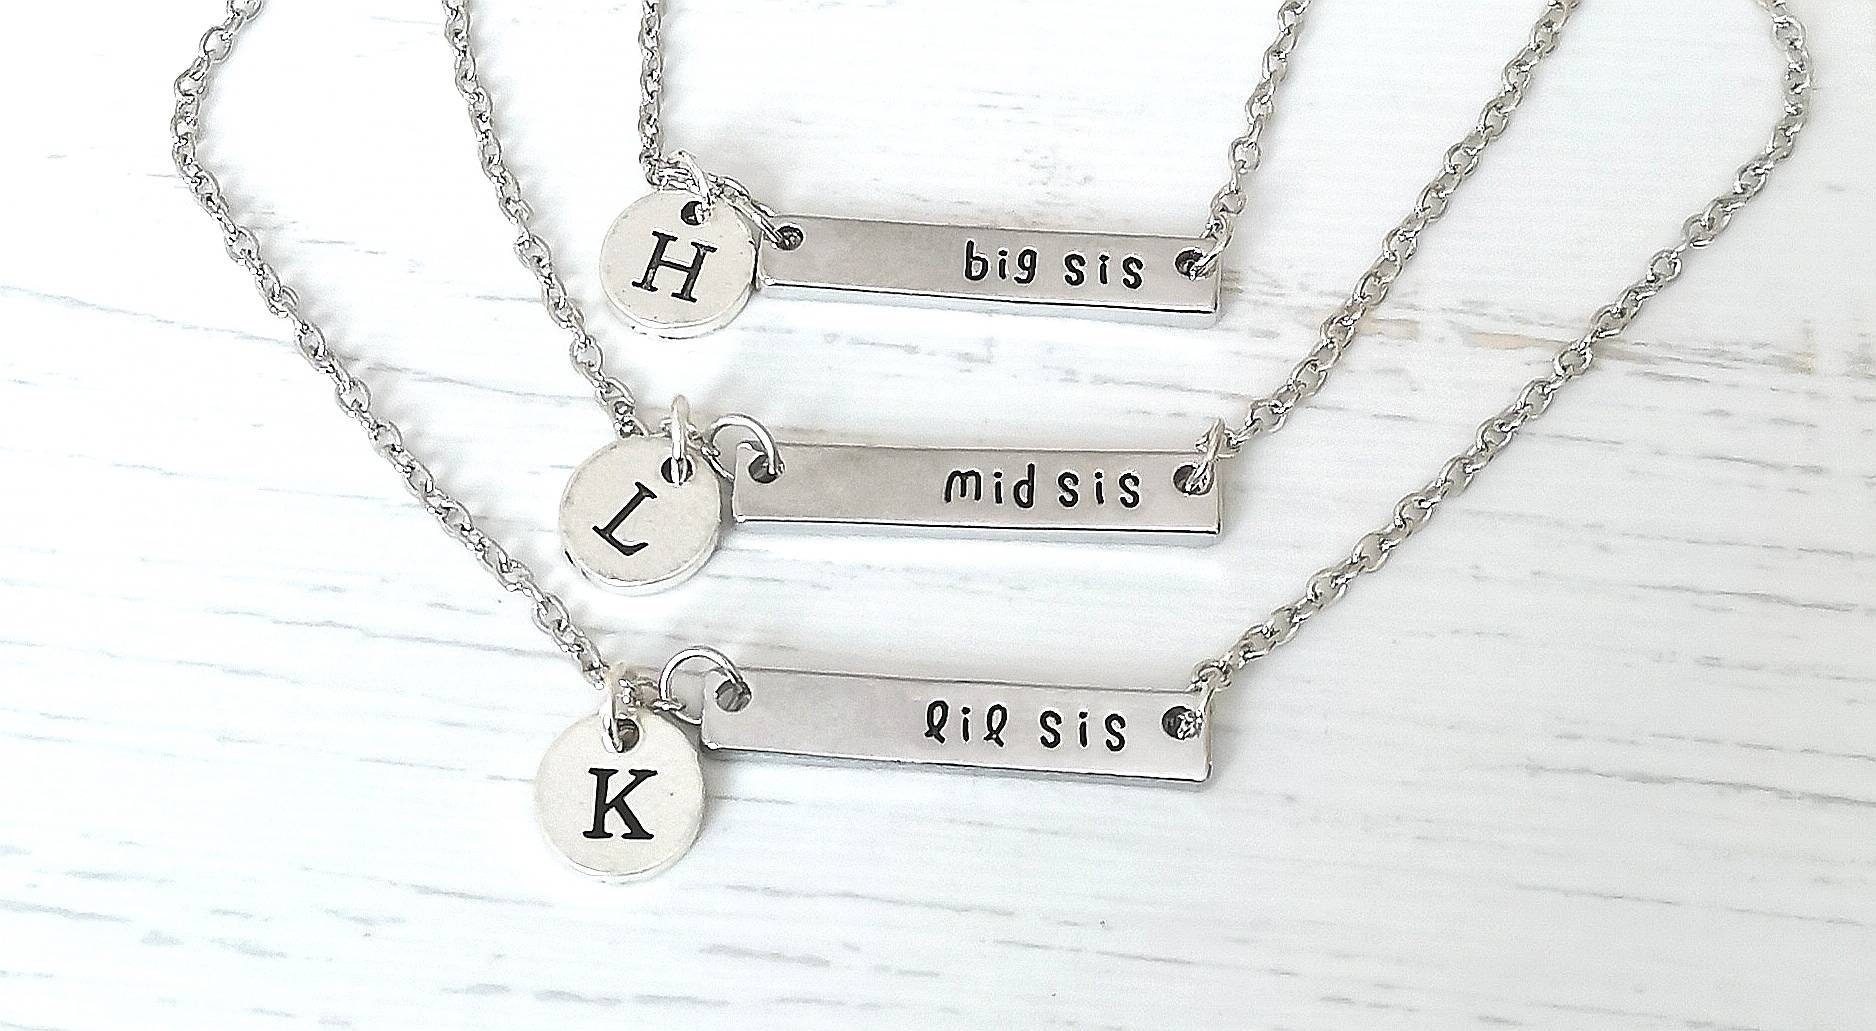 Sister Gifts, Gift for Sister, Sister necklaces, Big sister, Little Sister, Big Sis, Lil Sis, Big Sis Lil Sis, Sister Necklaces,Gift for Sis